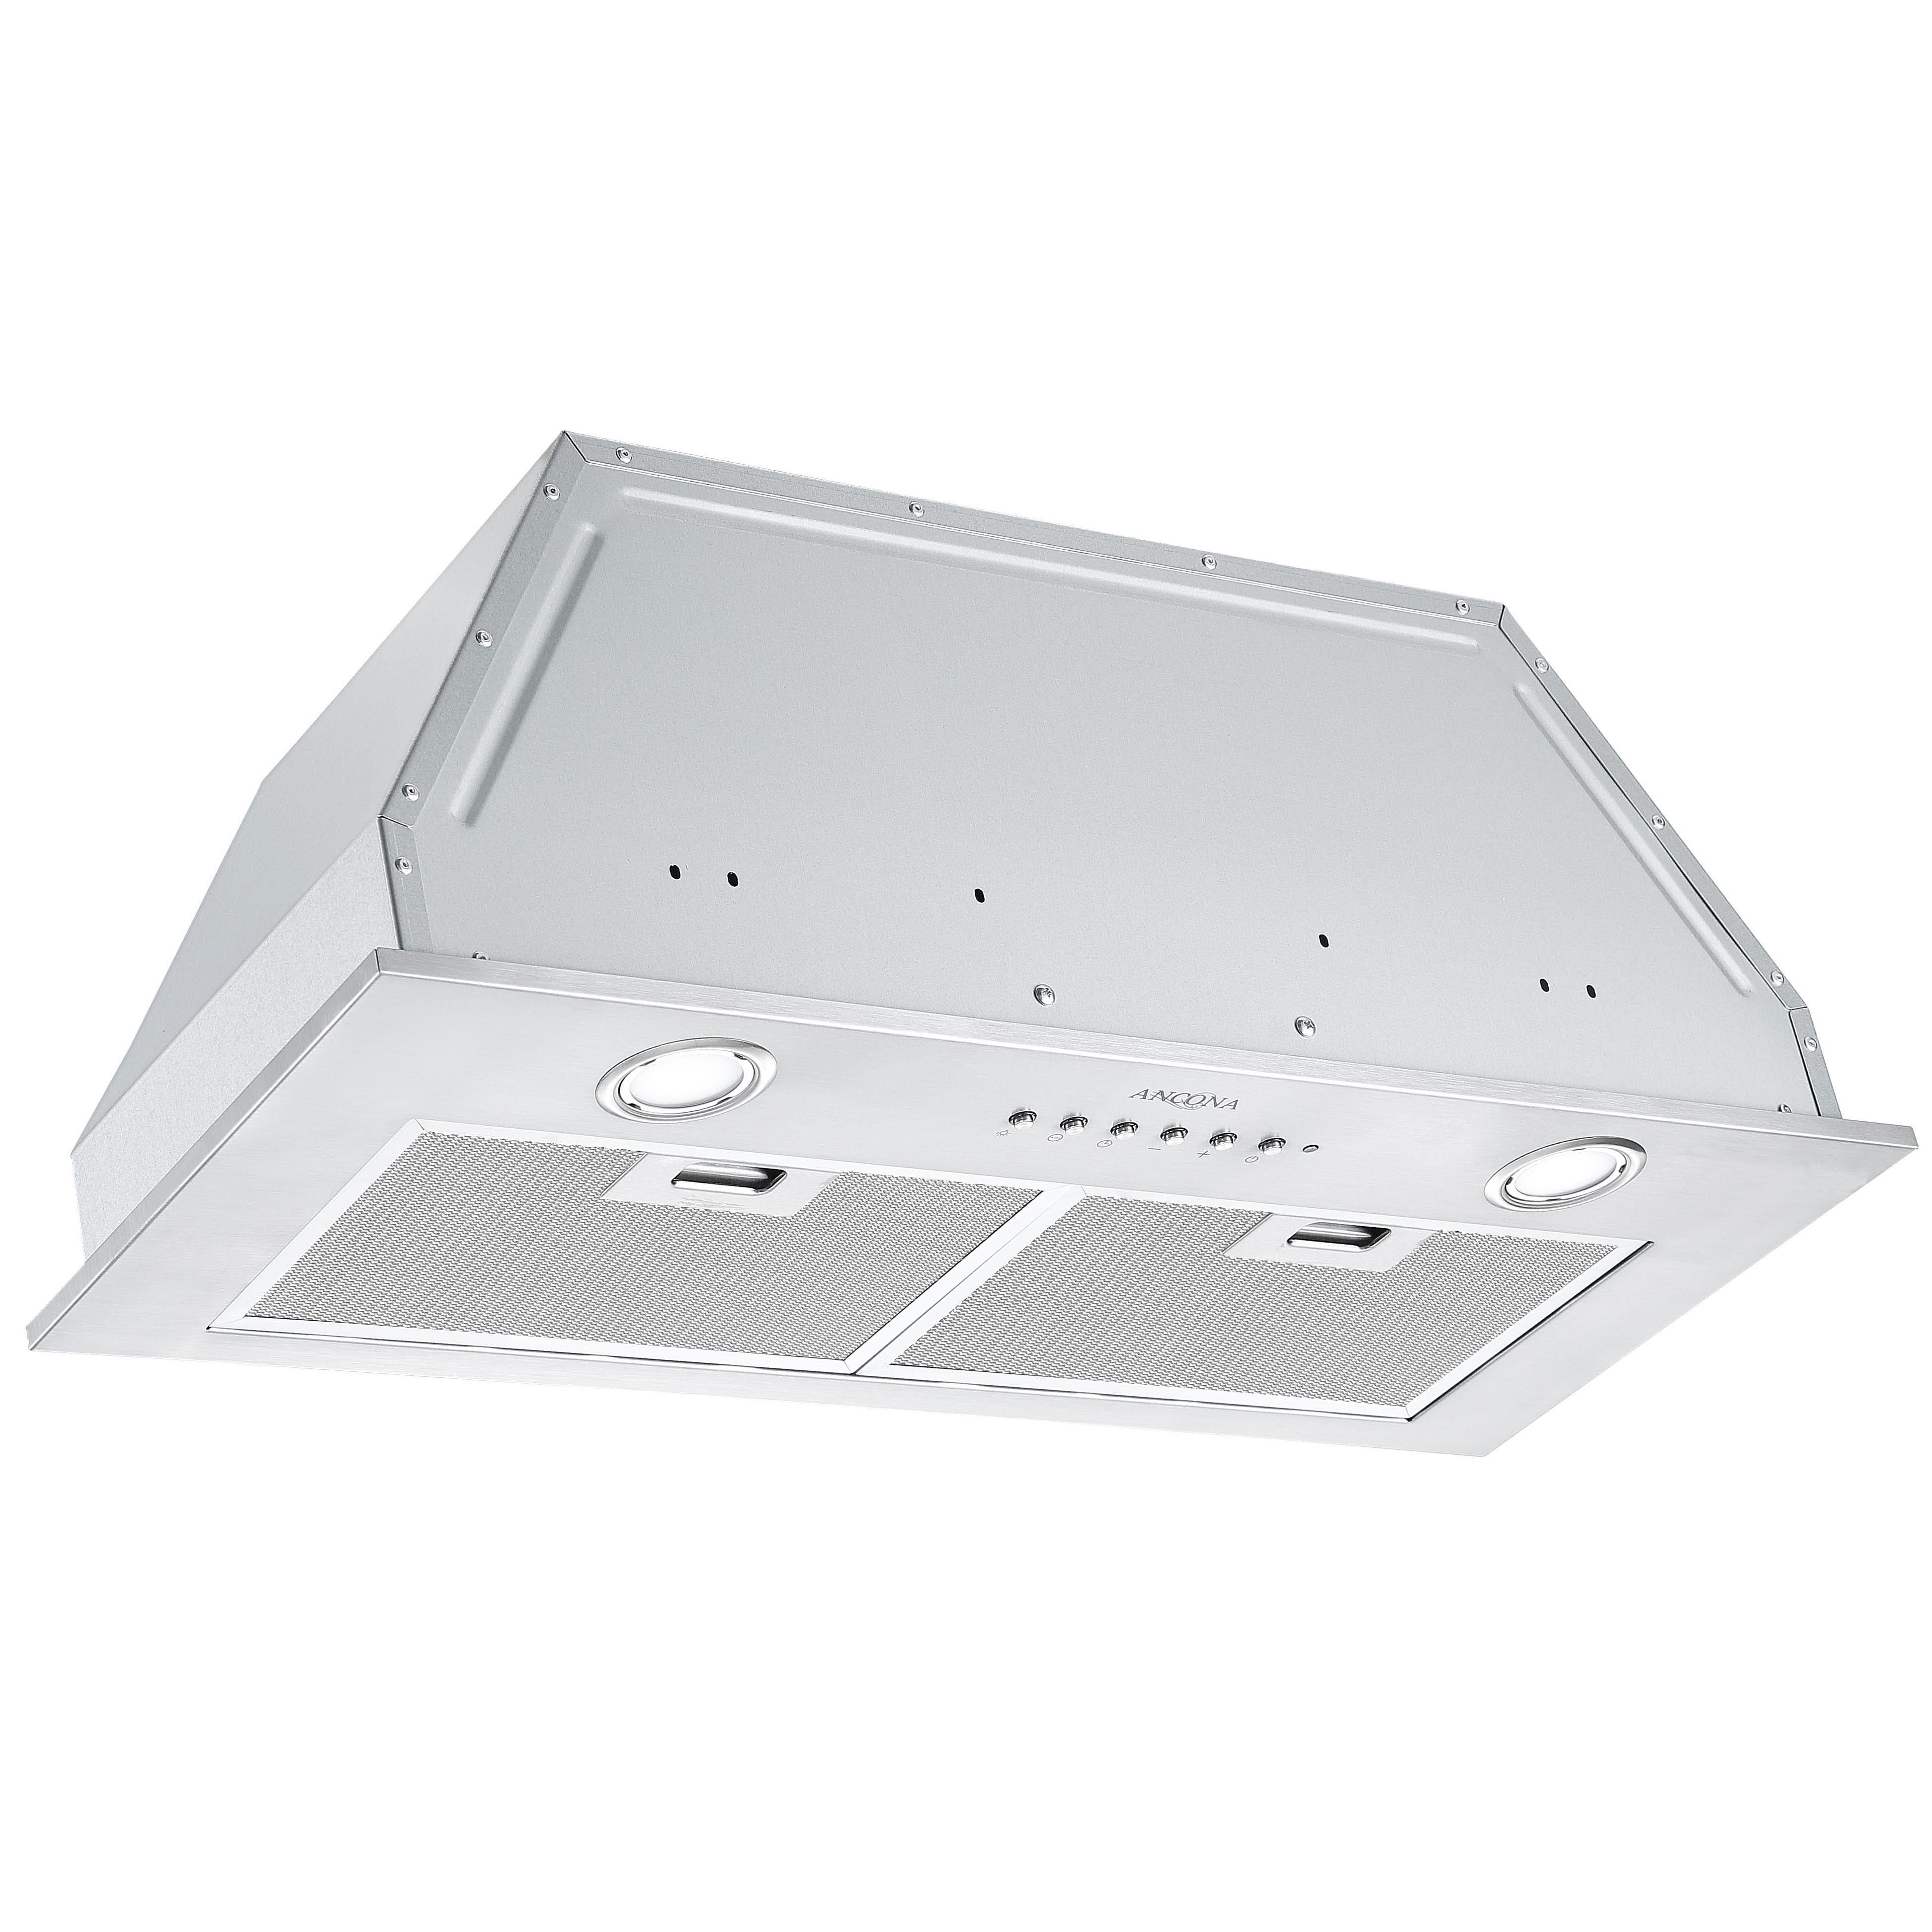 28 in. Ducted Stainless Steel Undercabinet Range Hood Insert with Night Light Feature